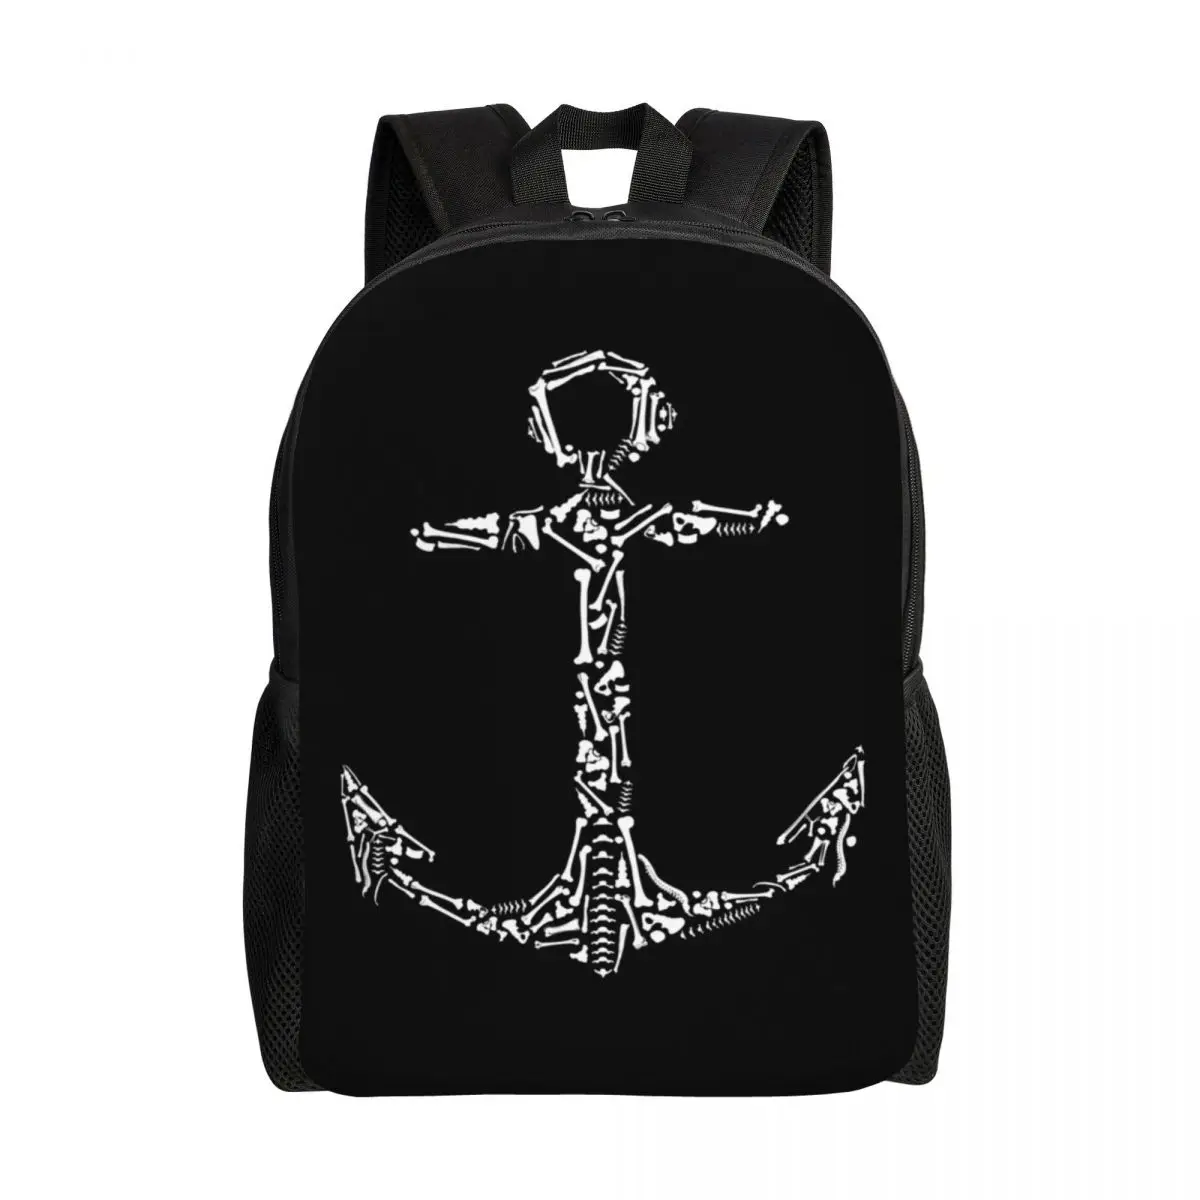 

Marine Anchor Made Of Bones Backpacks for Women Men School College Students Bookbag Fits 15 Inch Laptop Nautical Bags